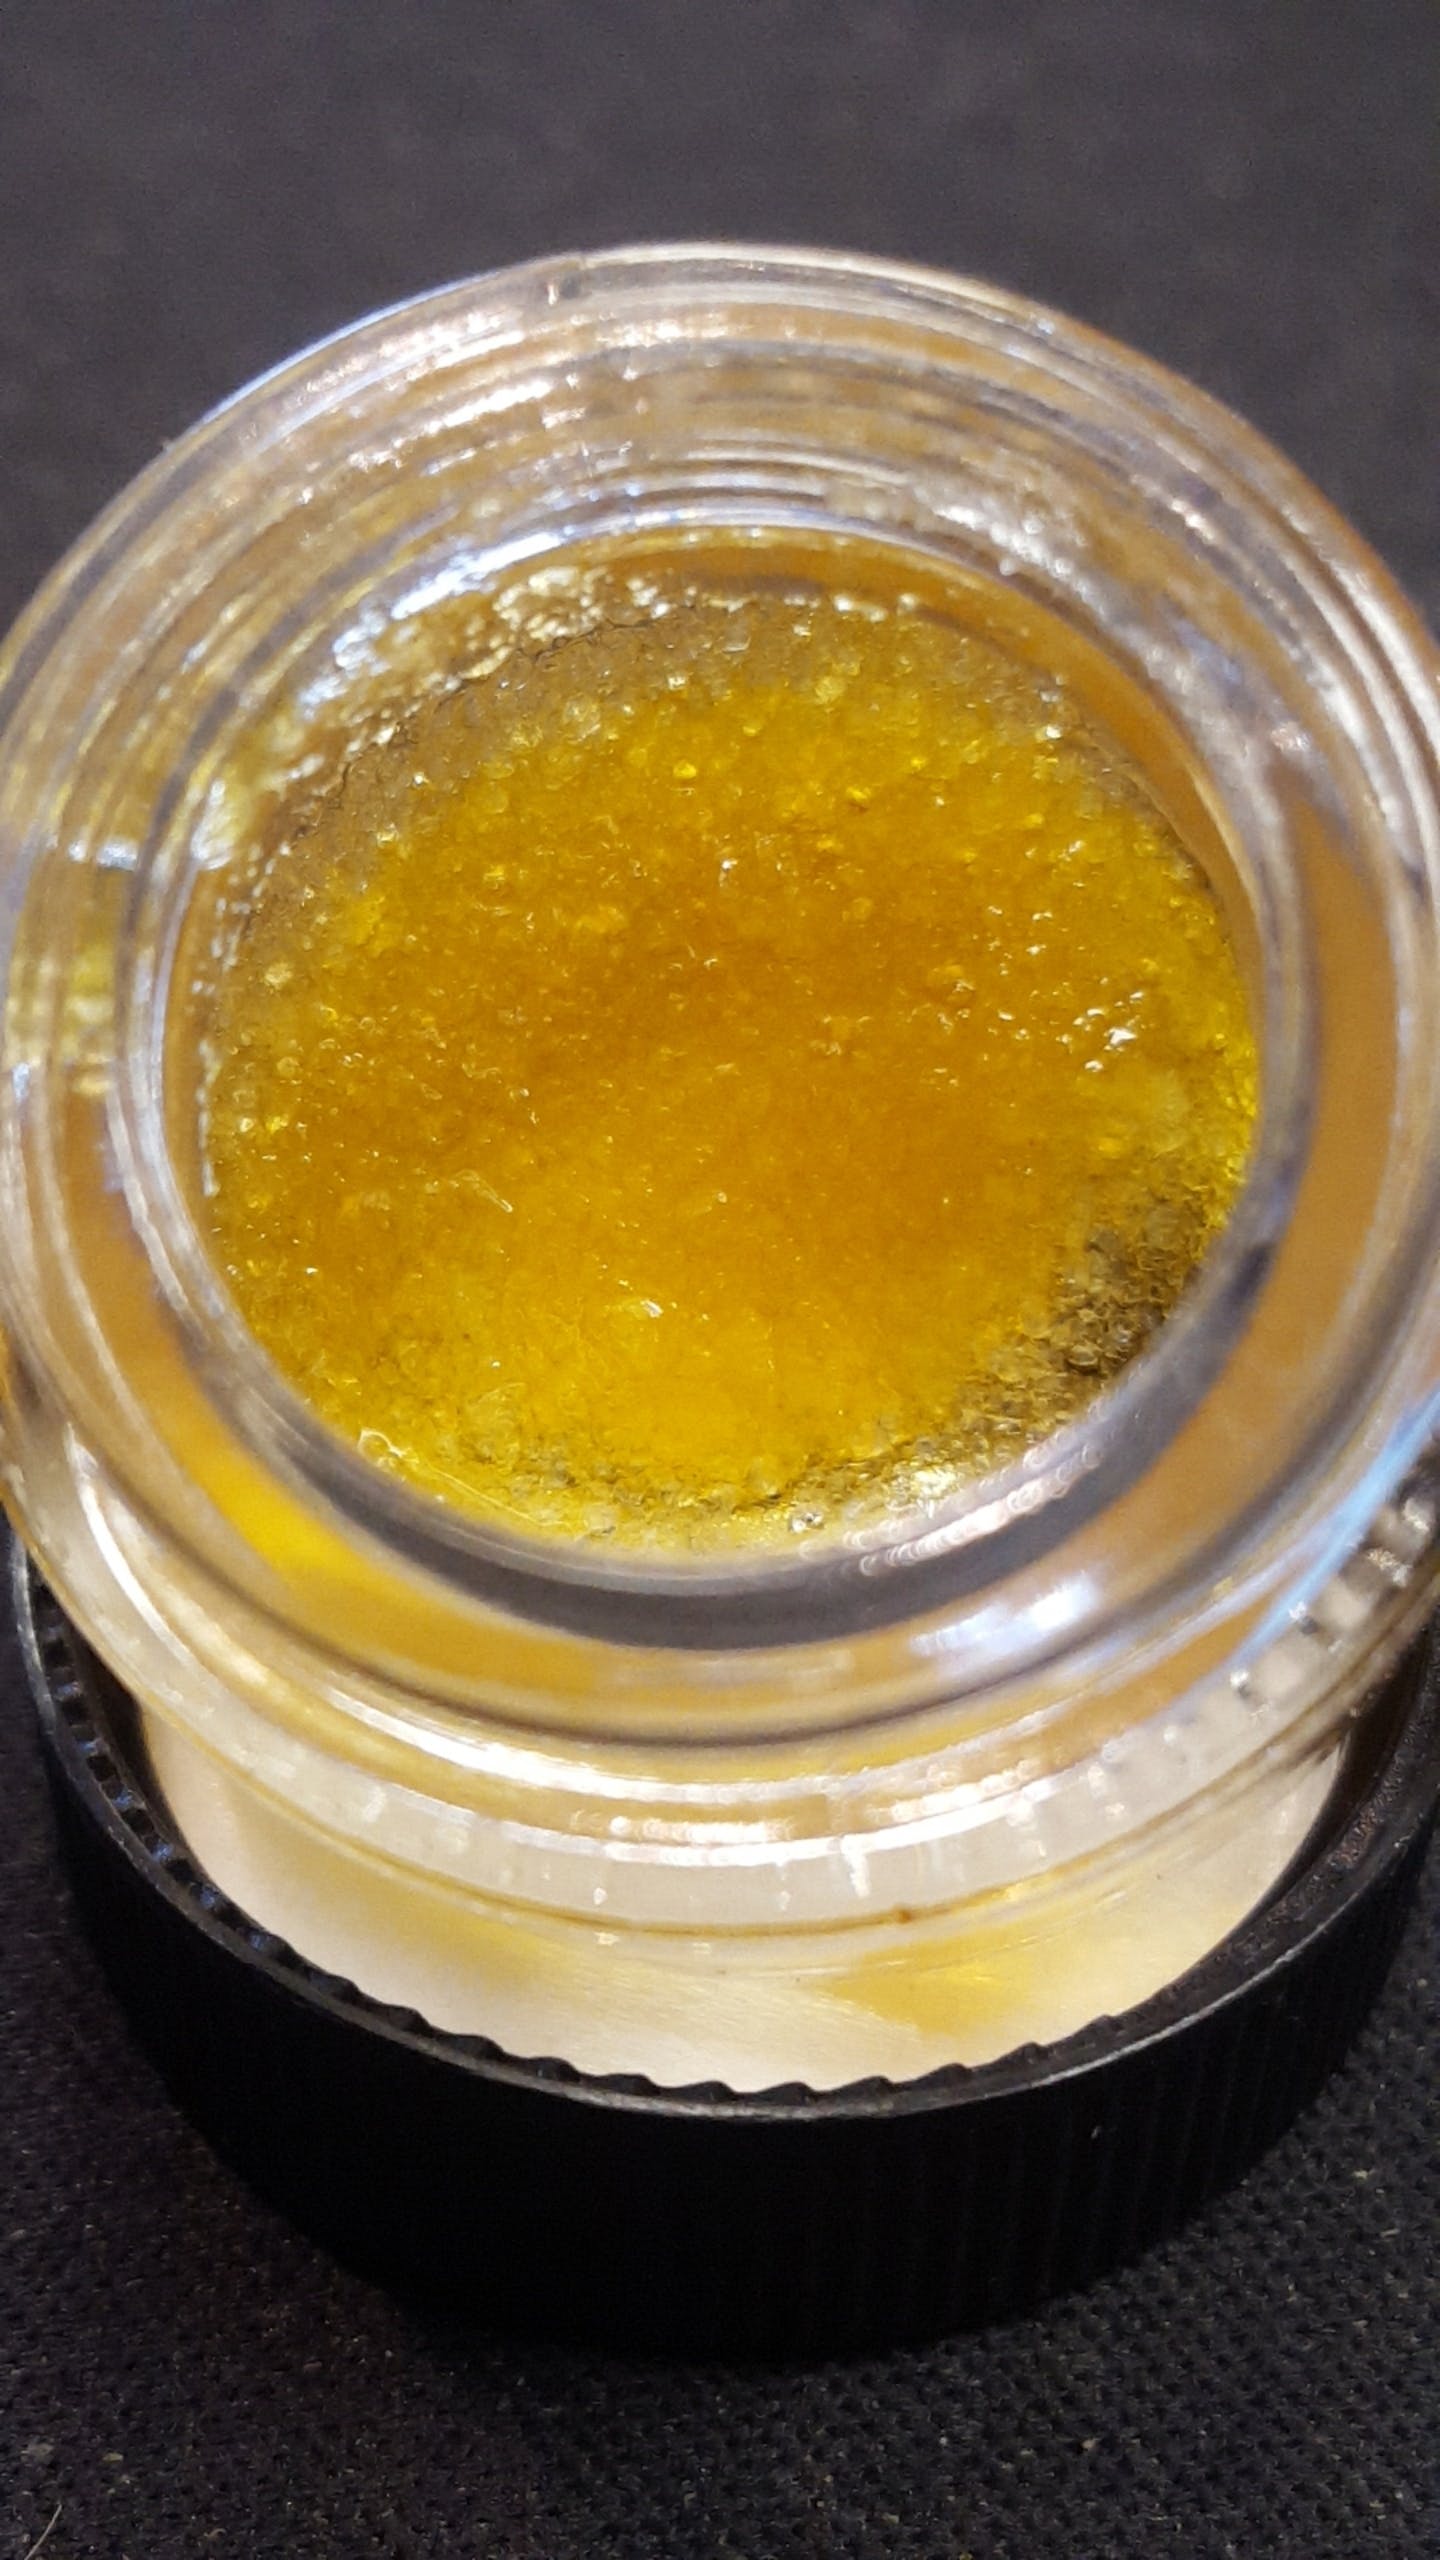 concentrate-mana-i95-live-resin